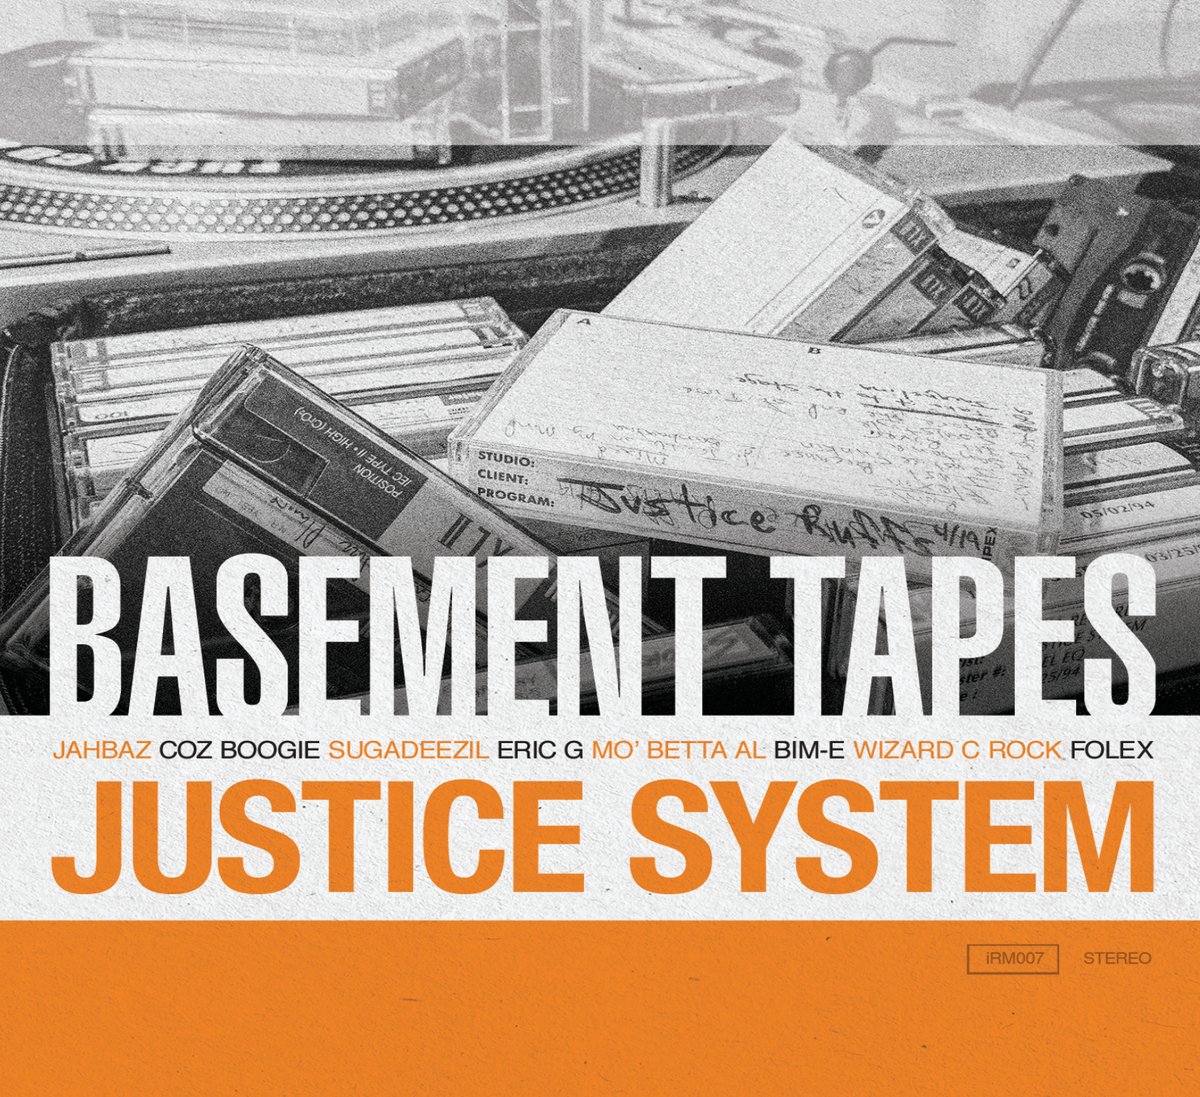 Justice system. Justice System - Basement Tapes. NFAIR Justice Systems. Hey Nobody was Justice System.